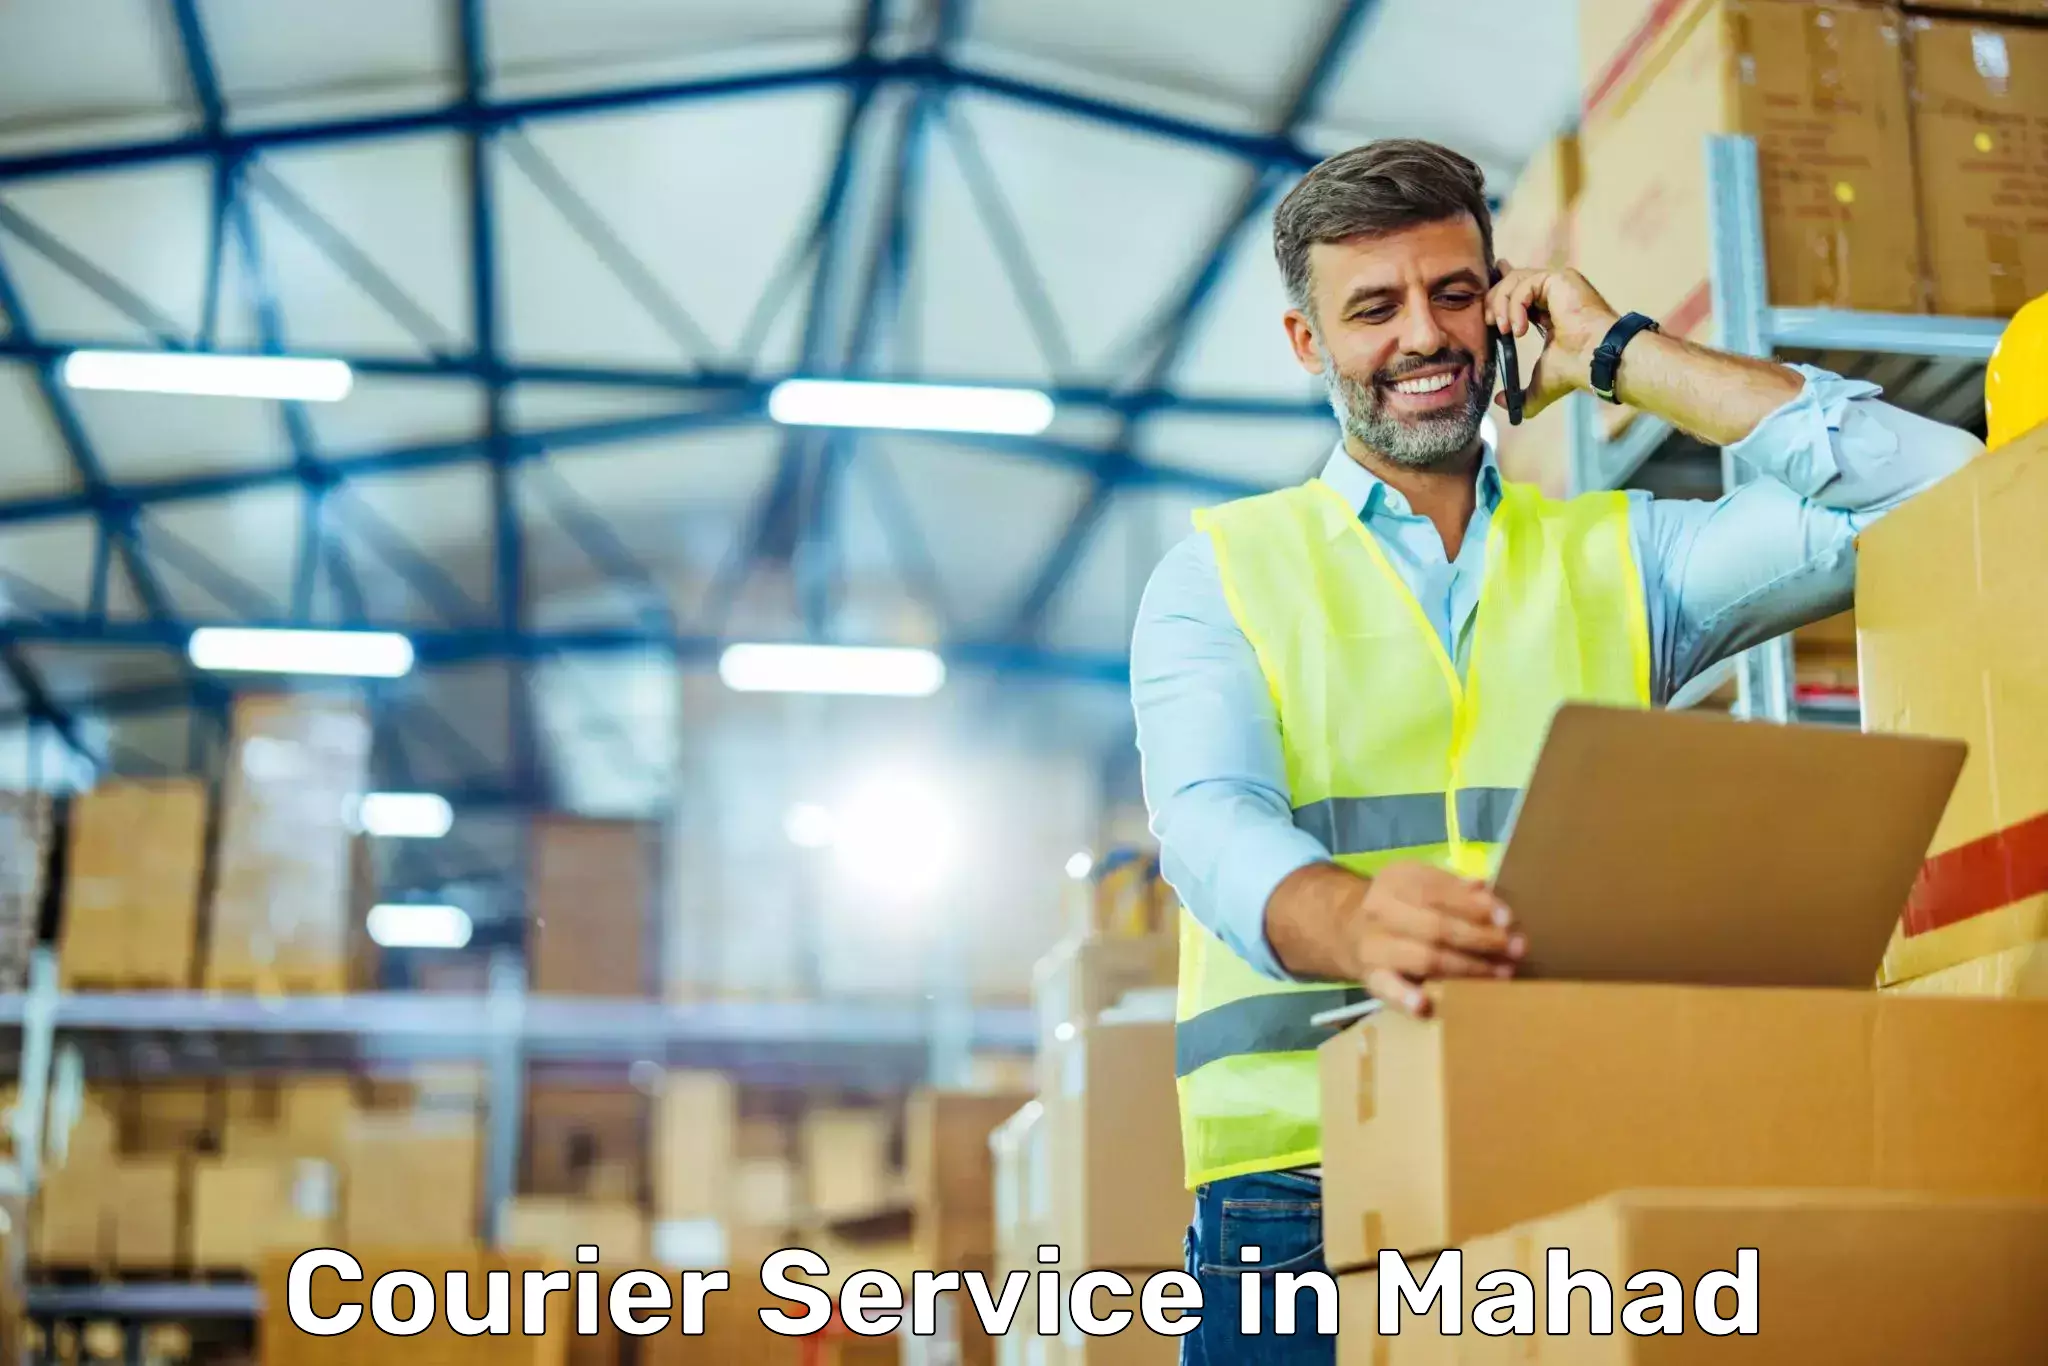 Parcel service for businesses in Mahad